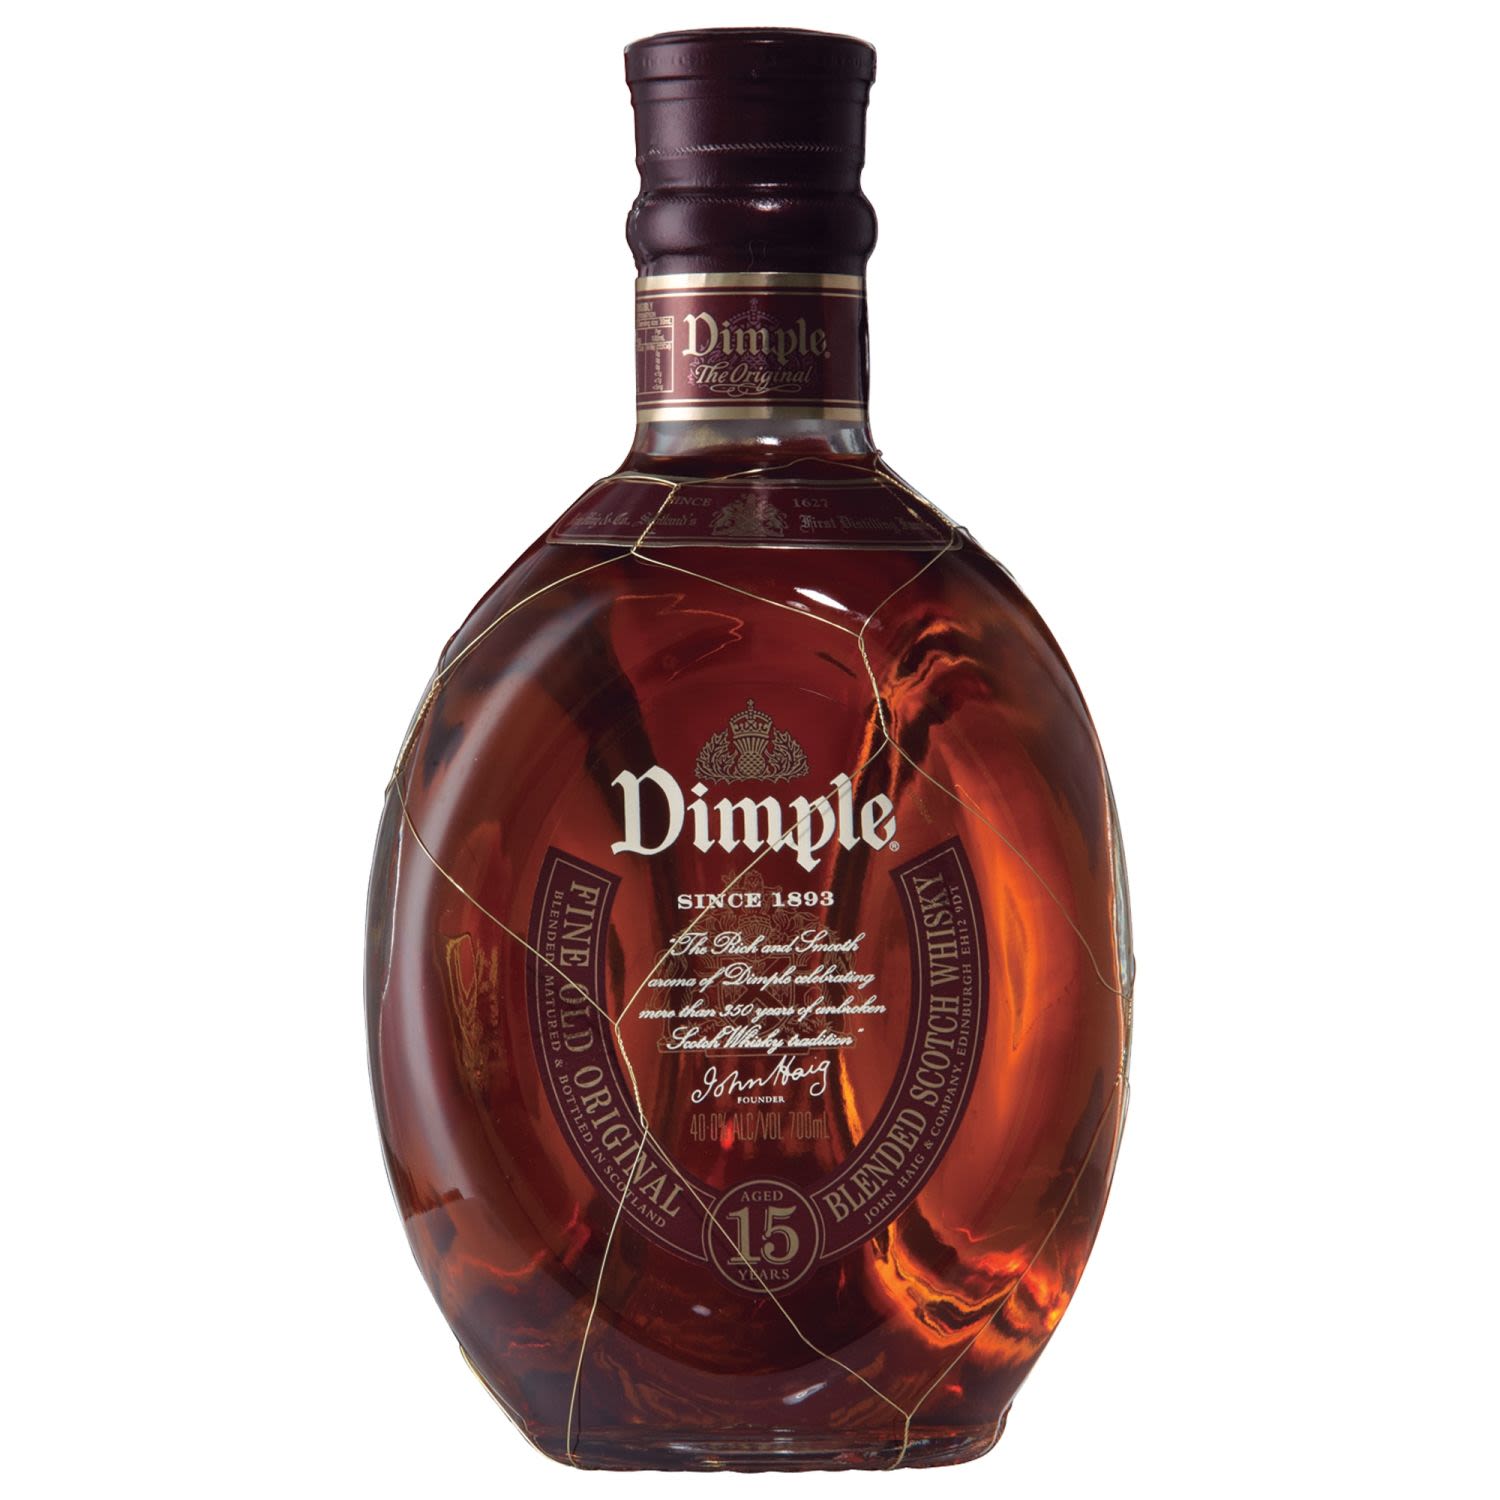 Flavoursome, light and smooth, Dimple 15 year old Scotch Whisky is an elegant Scotch. For the distinguished Scotch drinker, it is delicate on the palate with a hint of dark chocolate. Best served on the rocks or with a dash of water.<br /> <br />Alcohol Volume: 40.00%<br /><br />Pack Format: Bottle<br /><br />Standard Drinks: 22</br /><br />Pack Type: Bottle<br /><br />Country of Origin: Scotland<br />